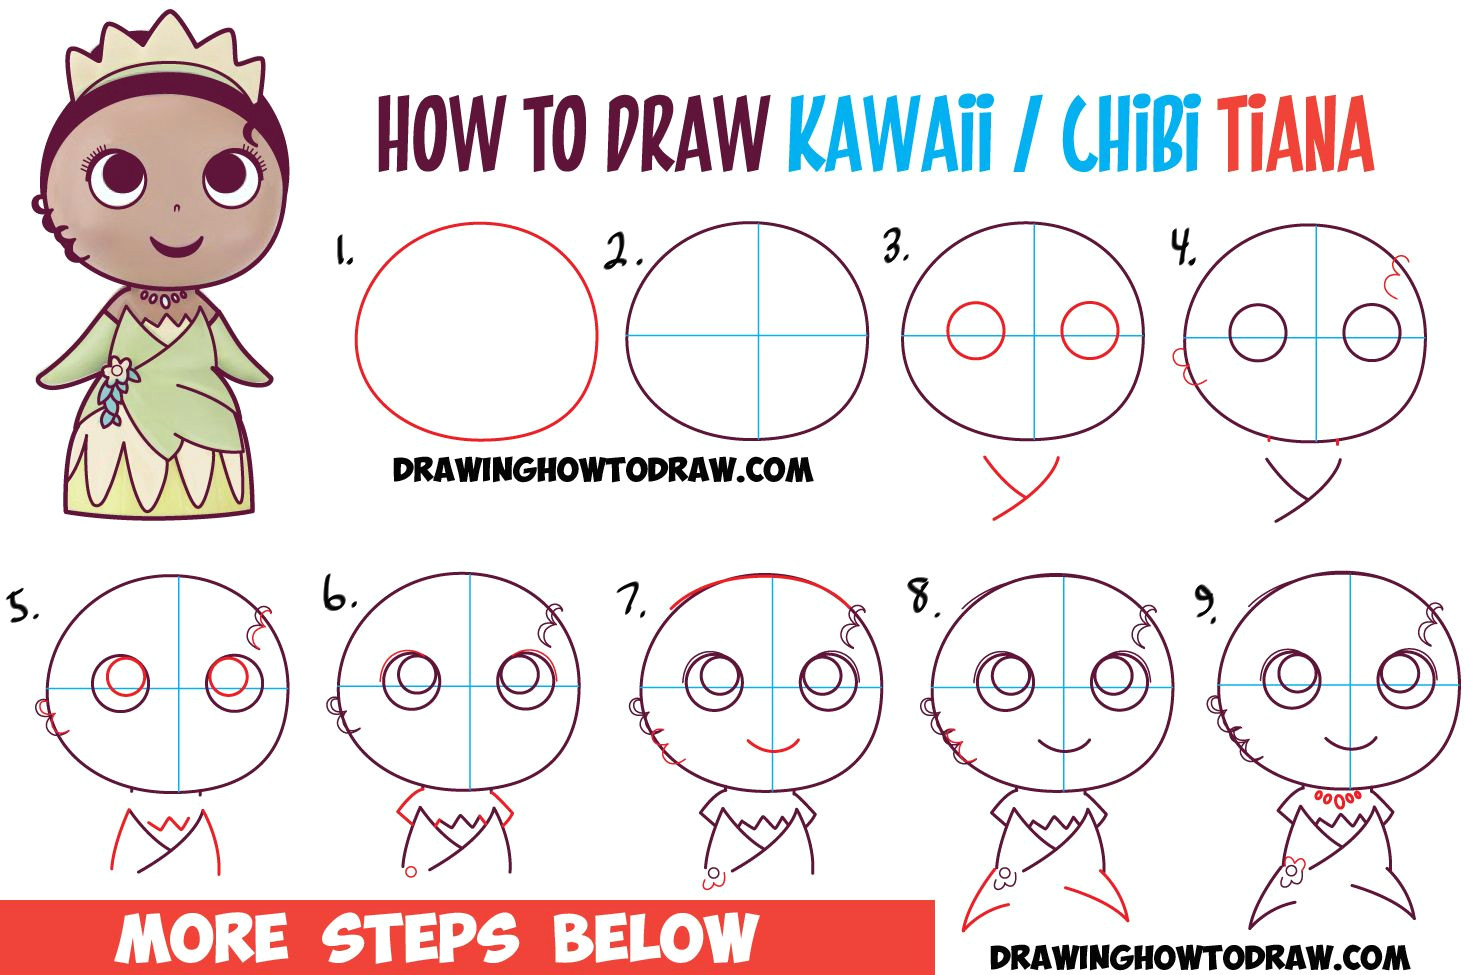 how to draw cute baby chibi kawaii tiana the disney princess easy step by step drawing tutorial